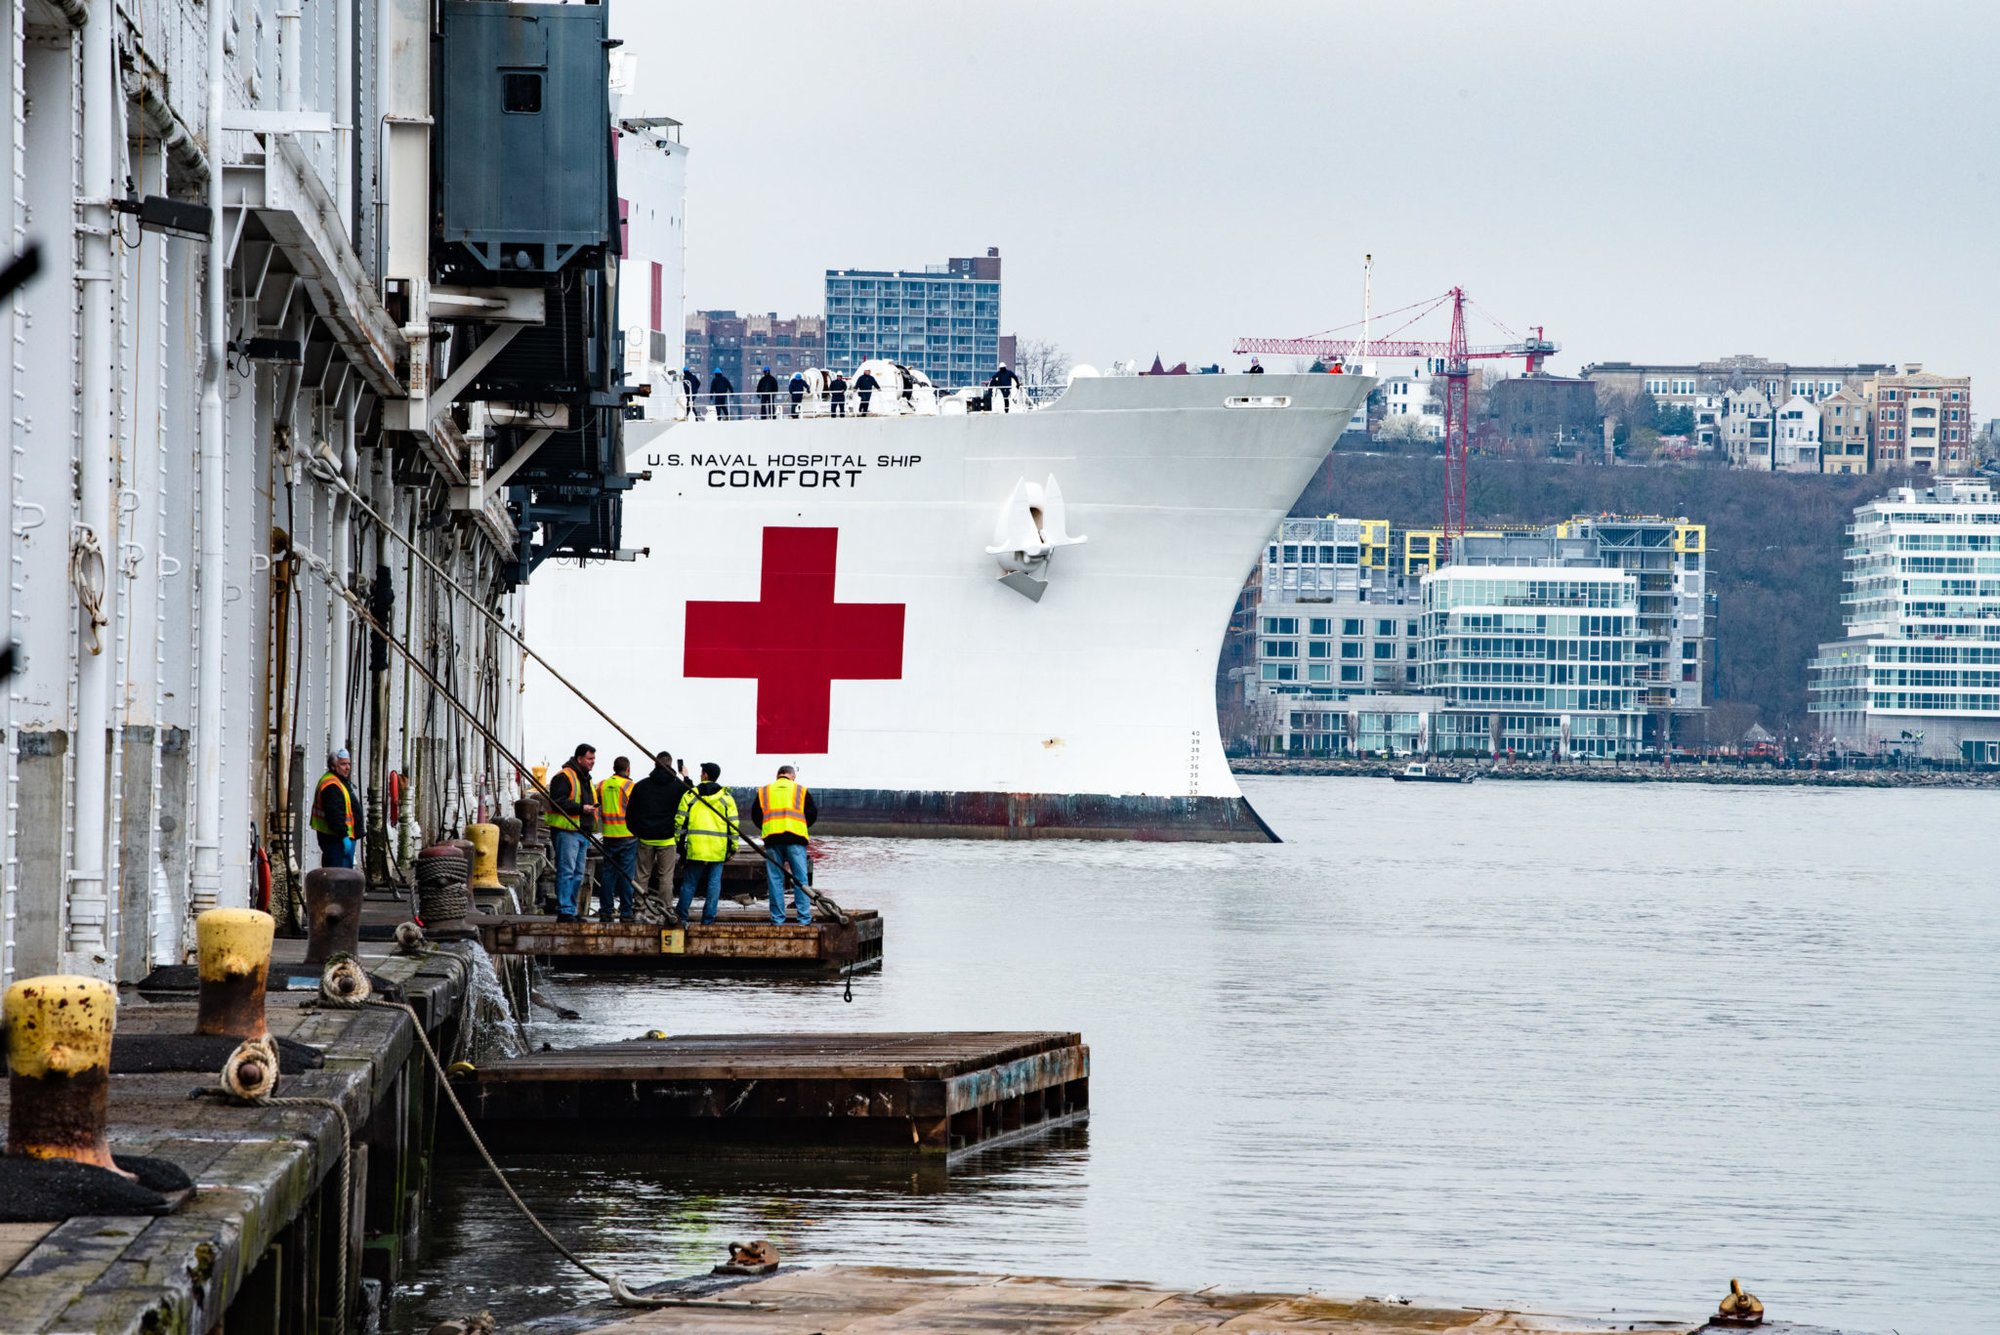 The USNS Comfort arrives in New York Harbor March 30, 2020, to support the national, state, and local response to the coronavirus (COVID-19). The hospital ship will provide approximately 1,000 beds for urgent care patients not infected with the virus, relieving pressure on local hospital systems. Photo by K.C. Wilsey/FEMA, via the Department of Defense.